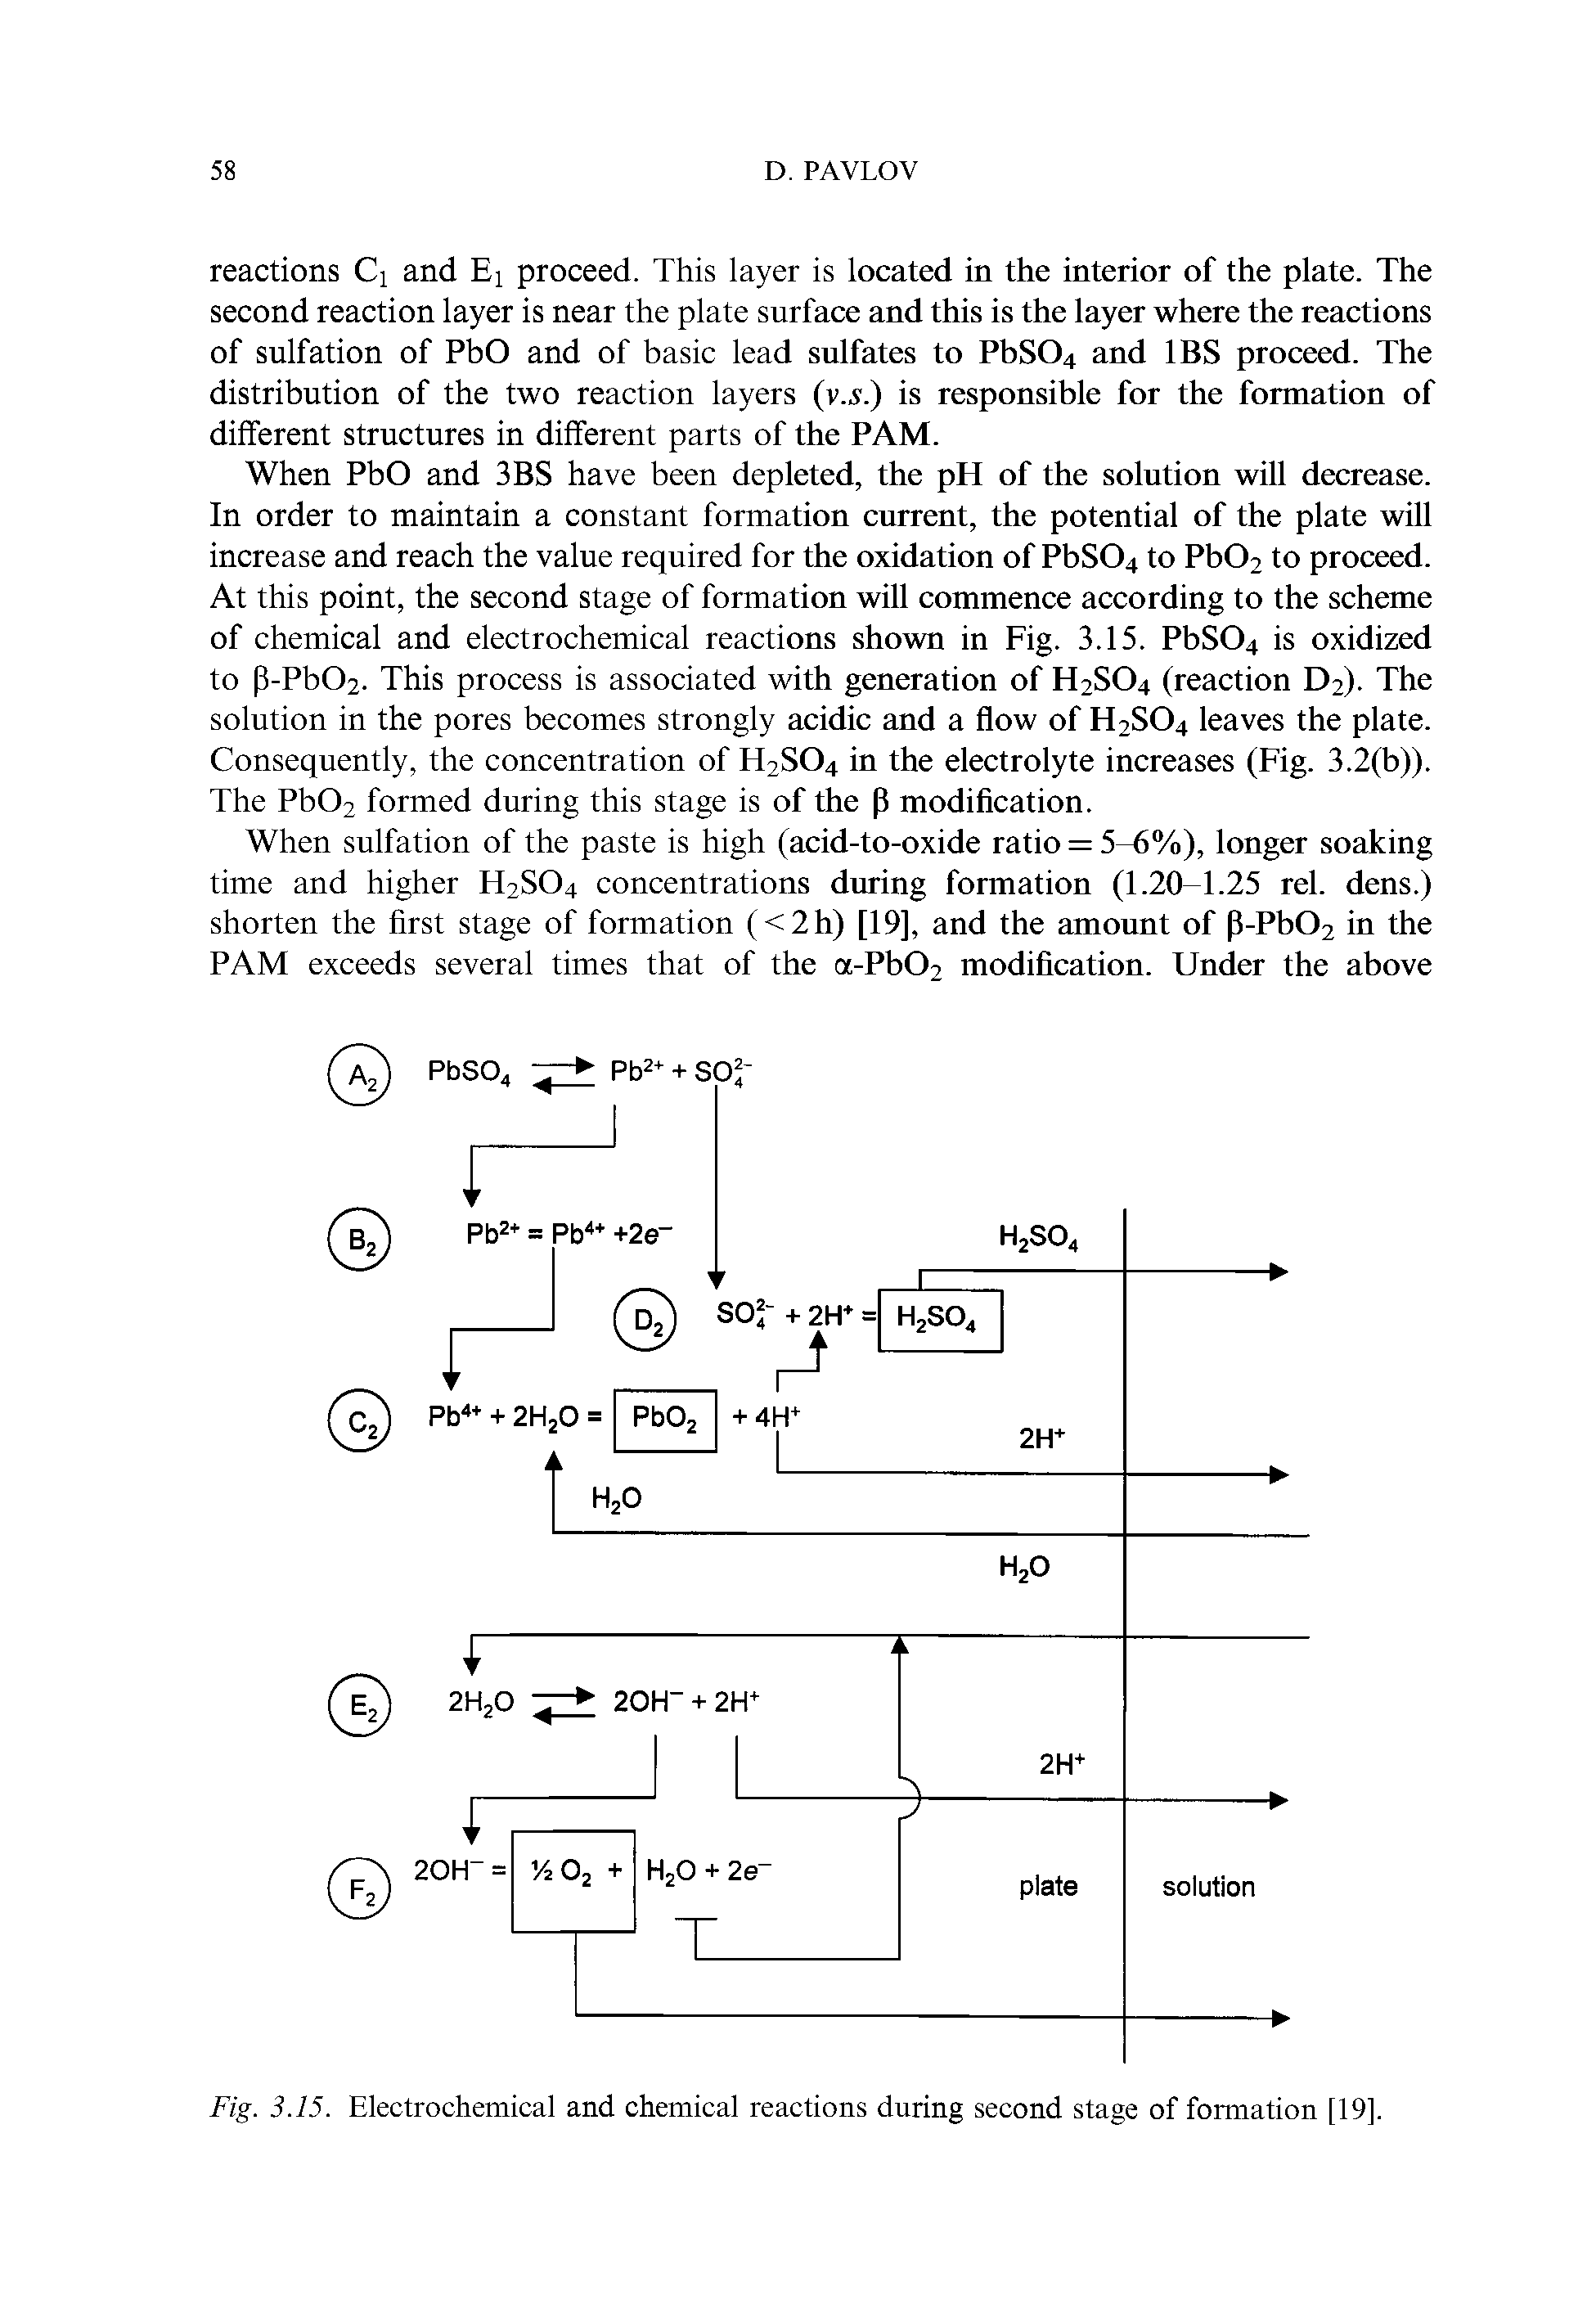 Fig. 3.15. Electrochemical and chemical reactions during second stage of formation [19].